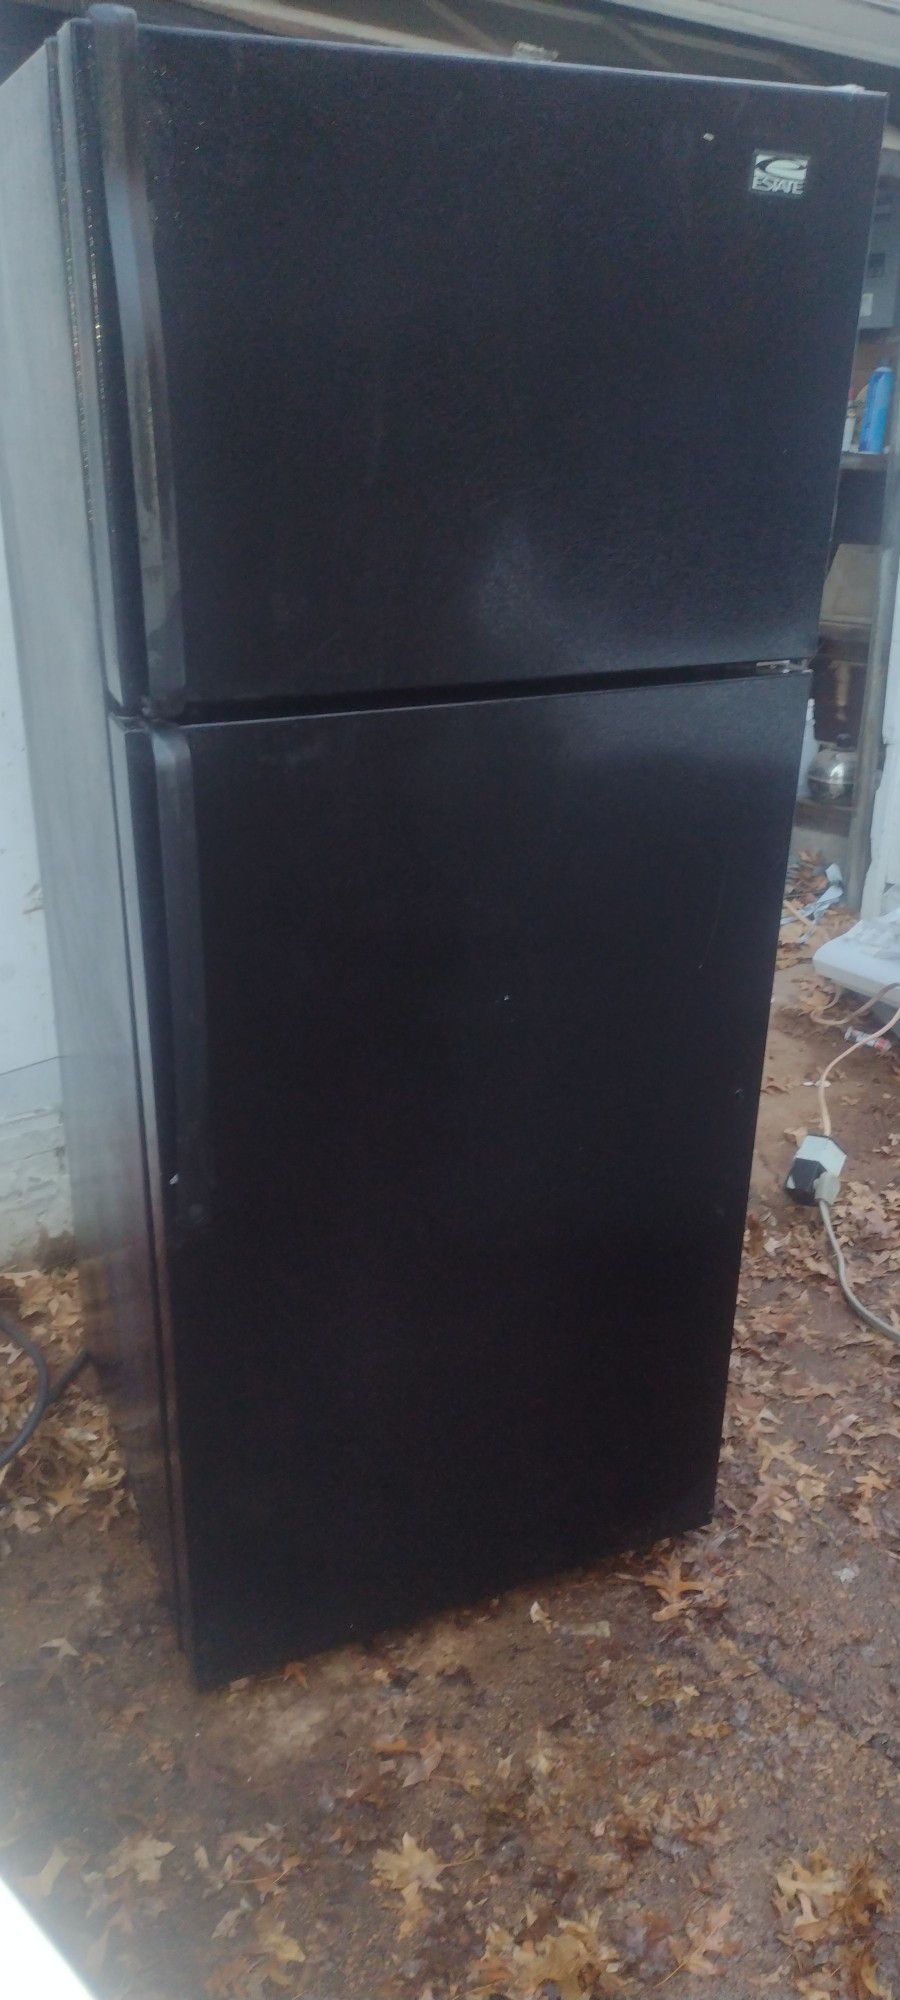 BLACK SPACE SAVER REFRIGERATOR IN MINT CONDITION 